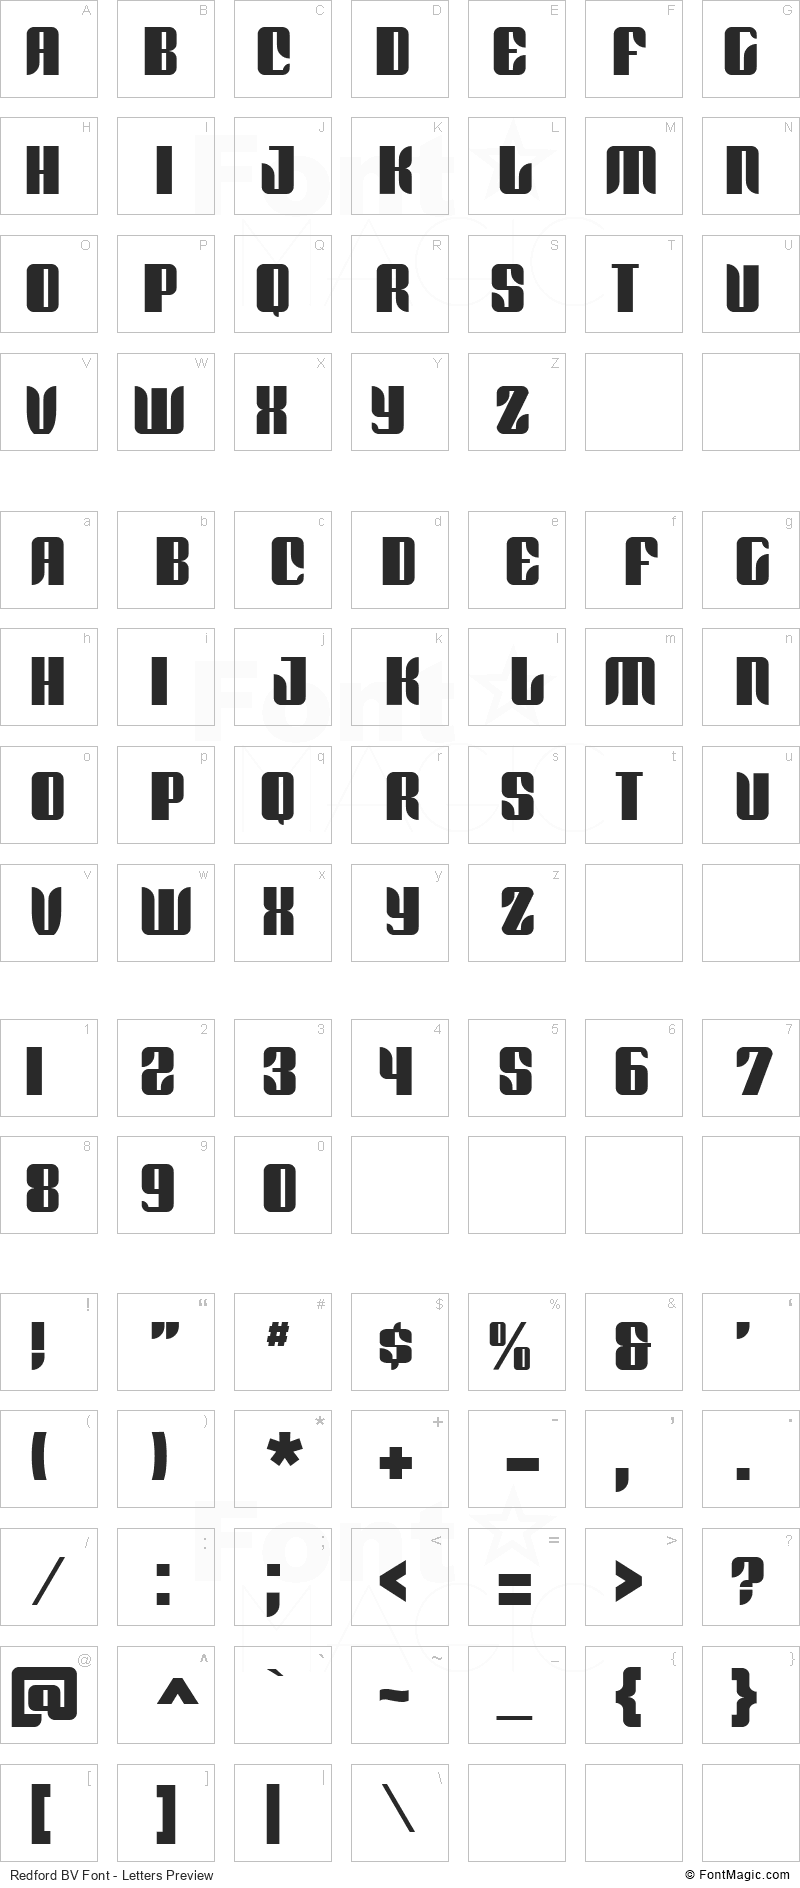 Redford BV Font - All Latters Preview Chart